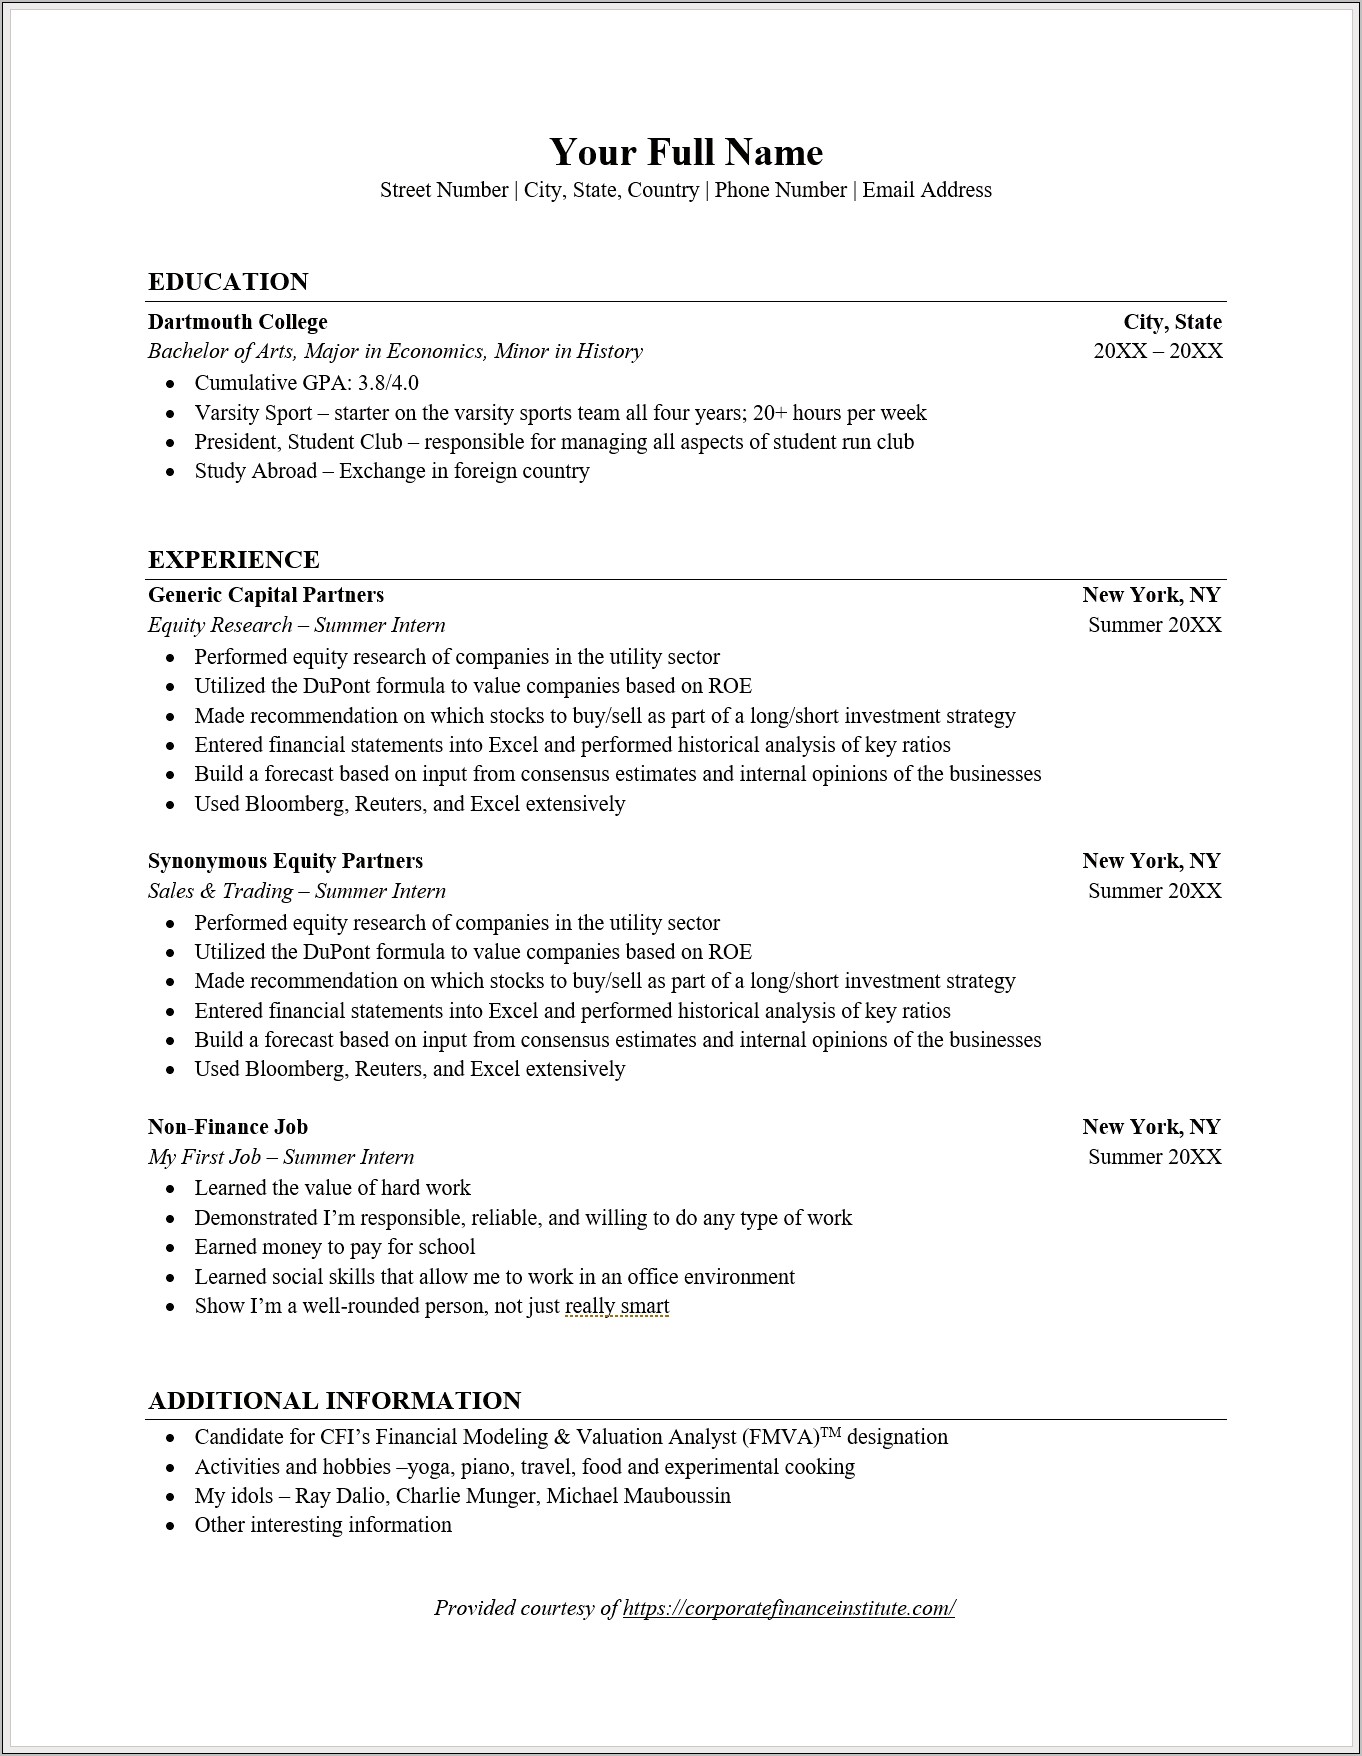 Can I List Jobs Without Order In Resume